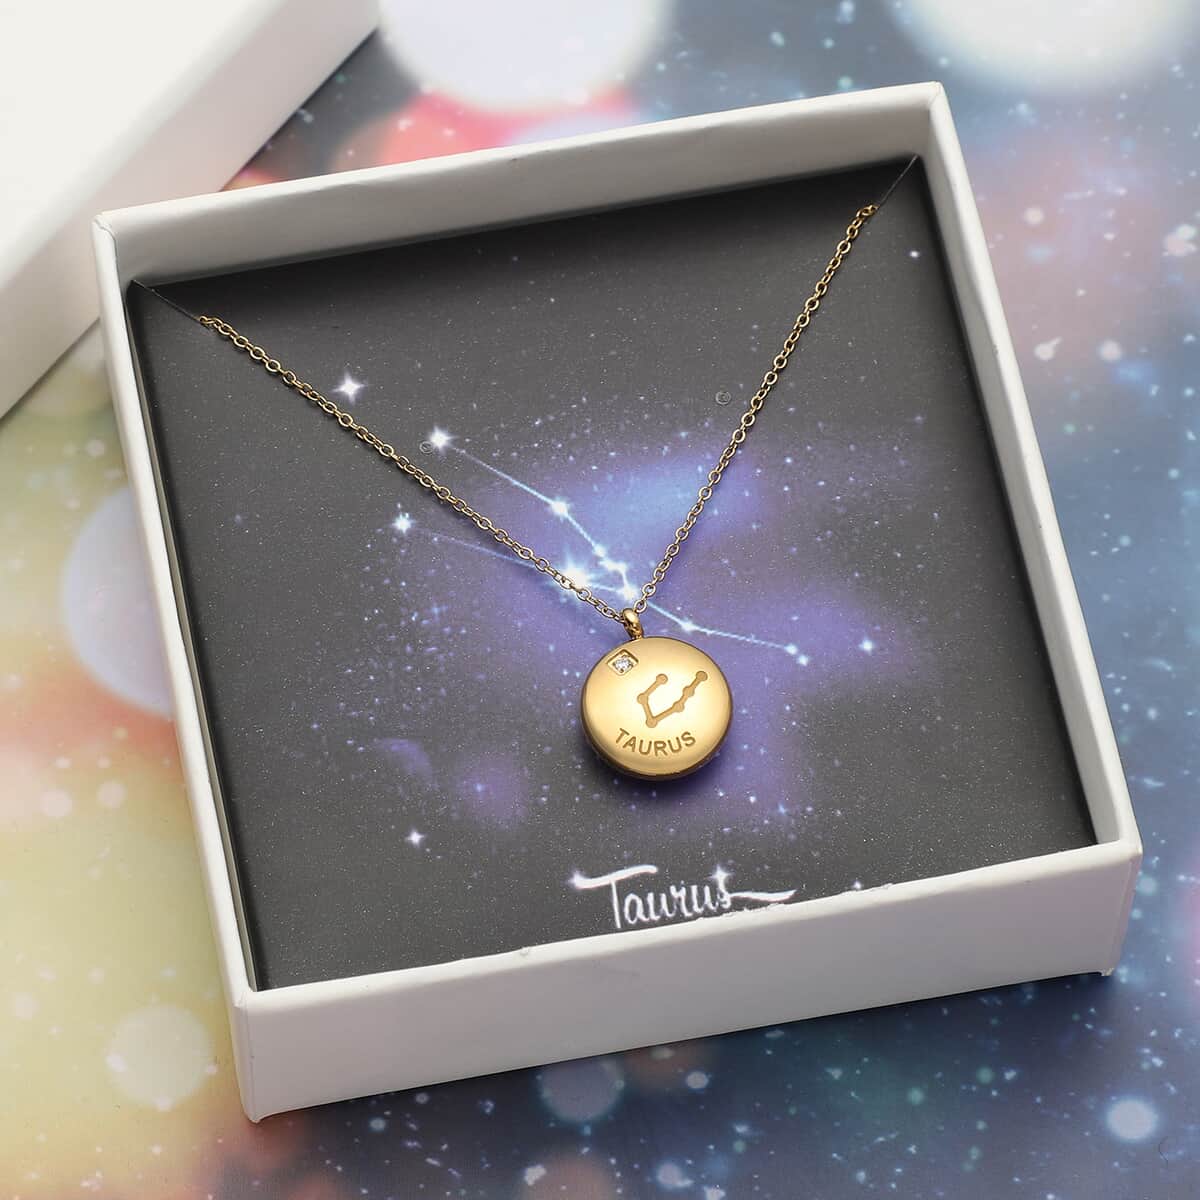 Taurus Zodiac Jewelry Gift Box with Austrian Crystal Constellation Necklace 20 Inches in ION Plated YG Stainless Steel image number 0